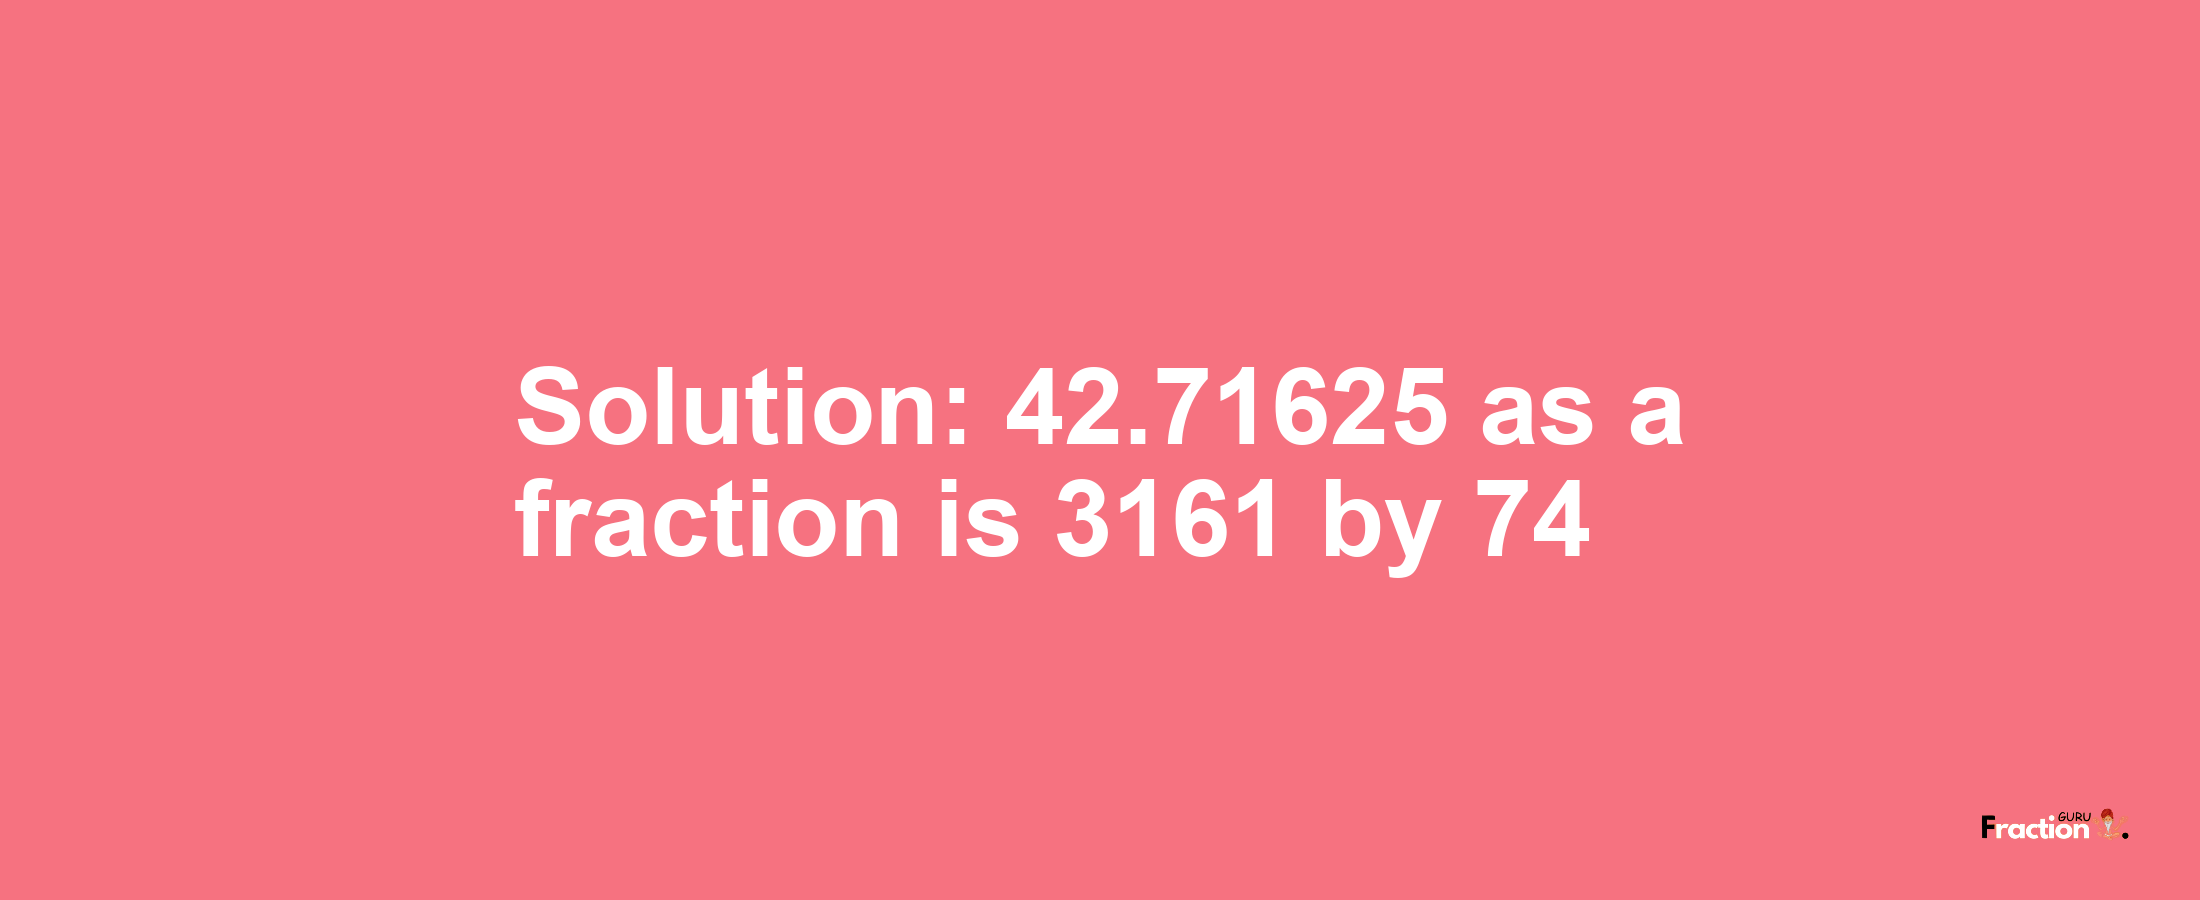 Solution:42.71625 as a fraction is 3161/74